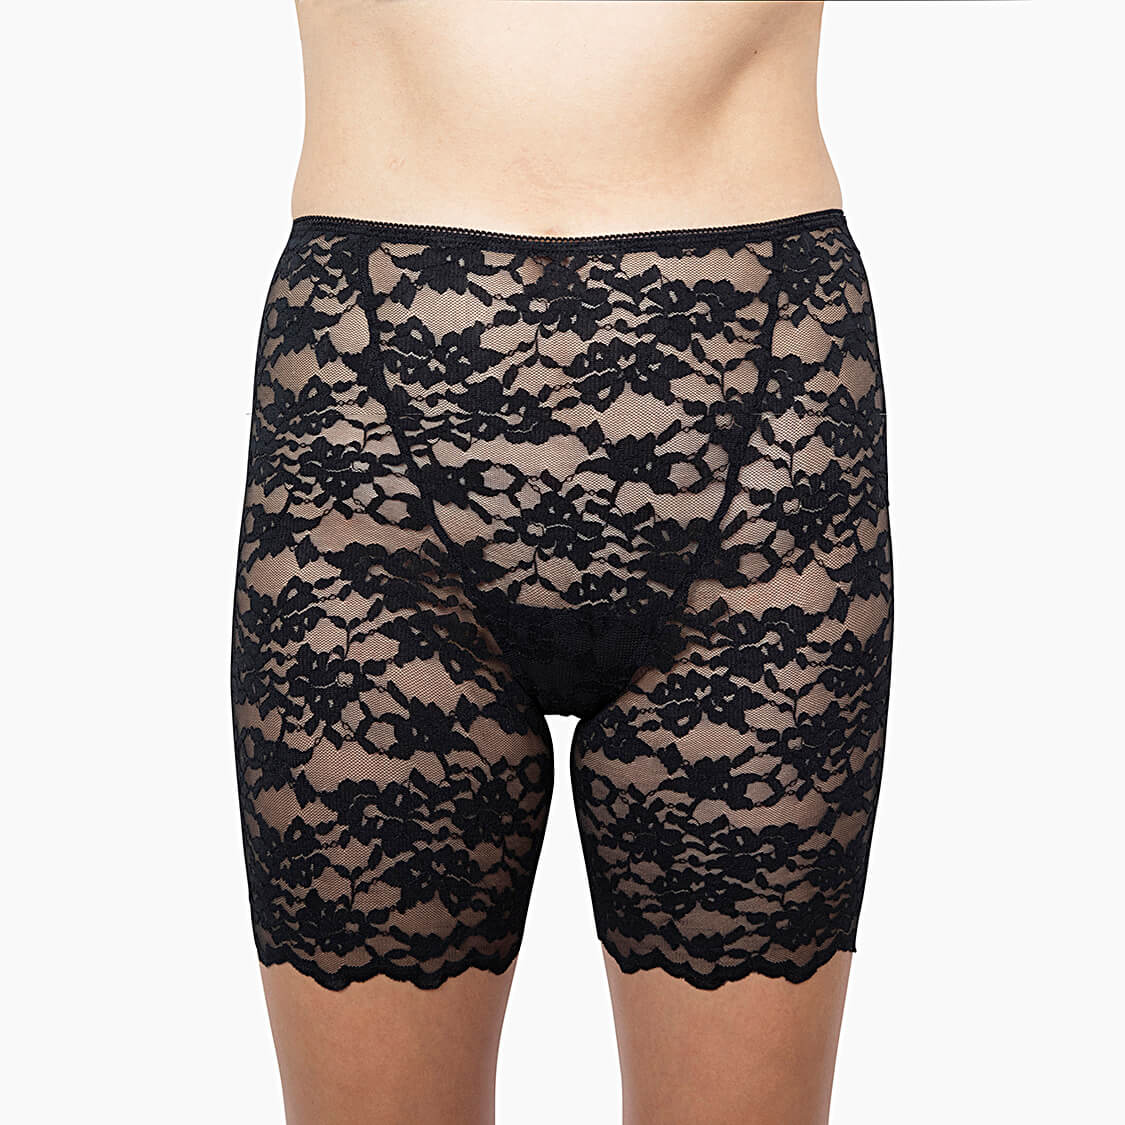 Under Dress Shorts in Black Lace